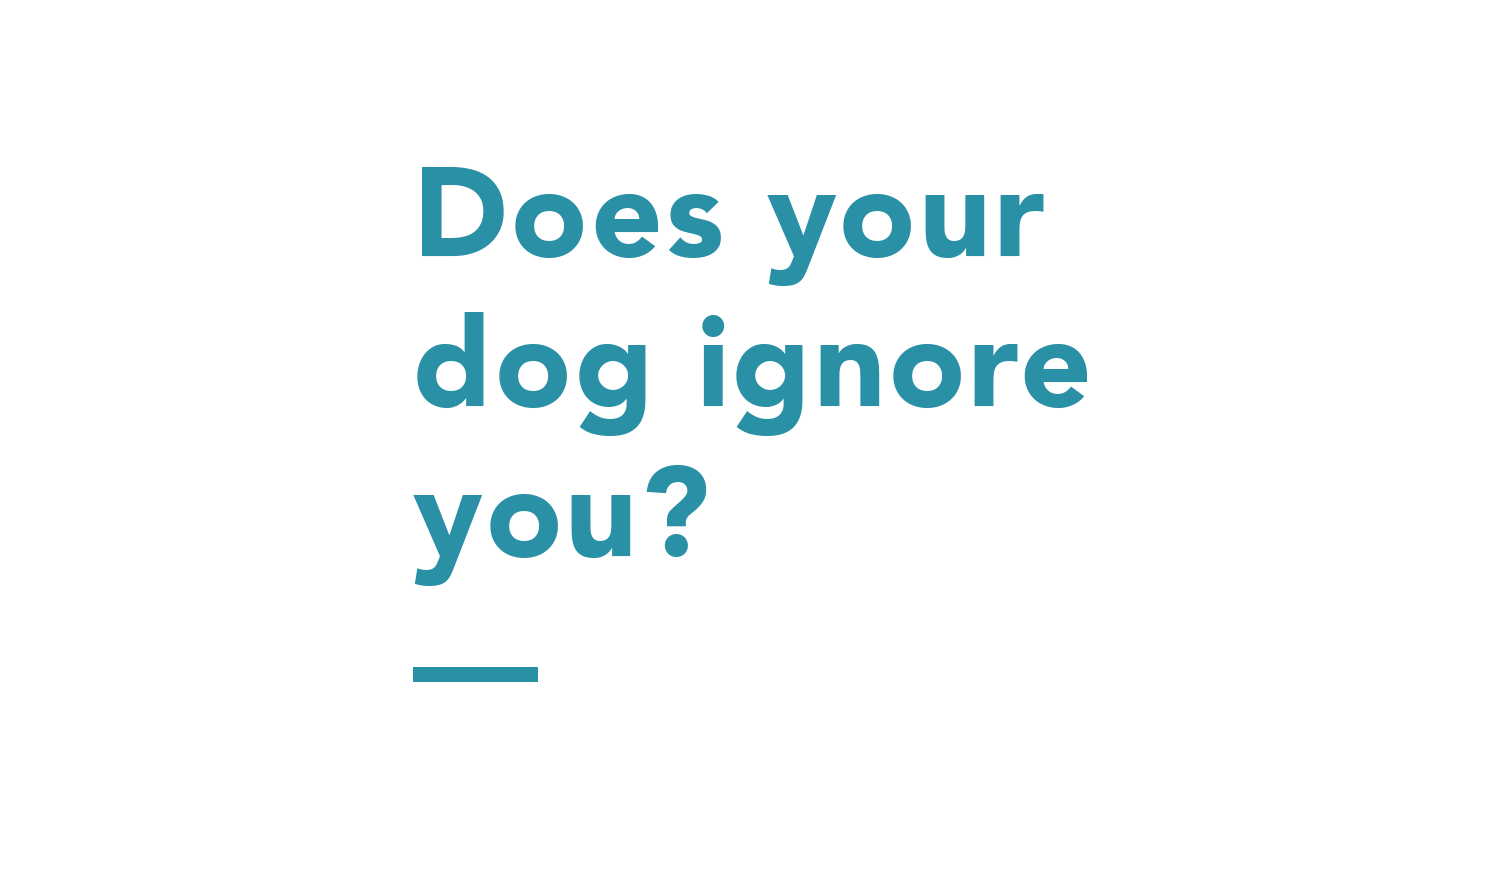 connection-dog-training-does-your-dog-ignore-you-text.png